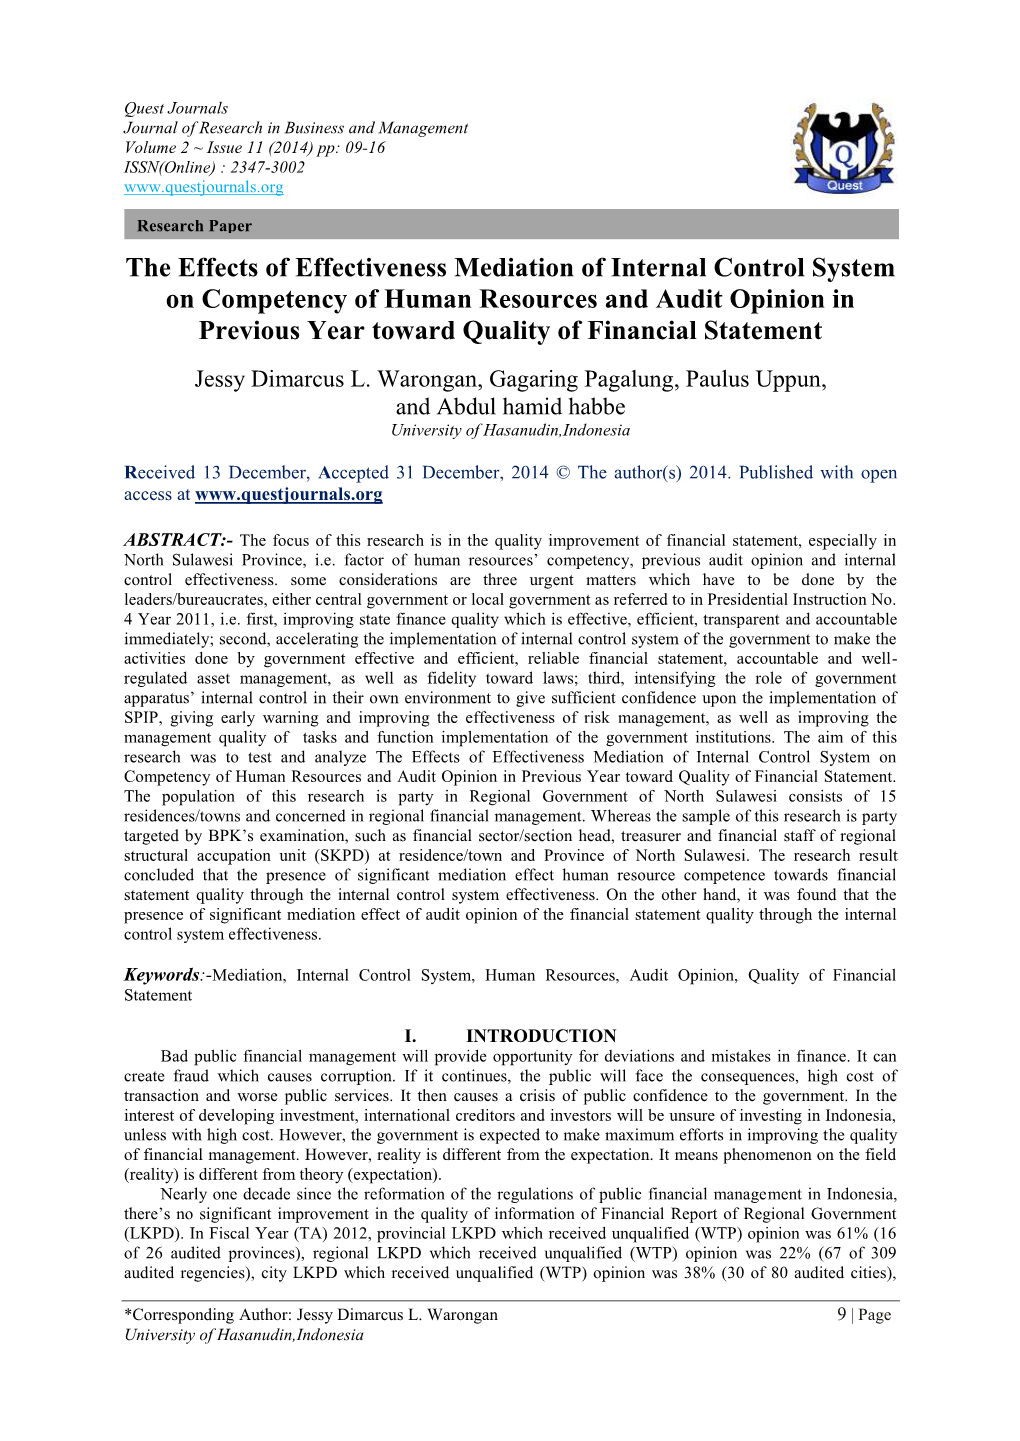 The Effects of Effectiveness Mediation of Internal Control System On